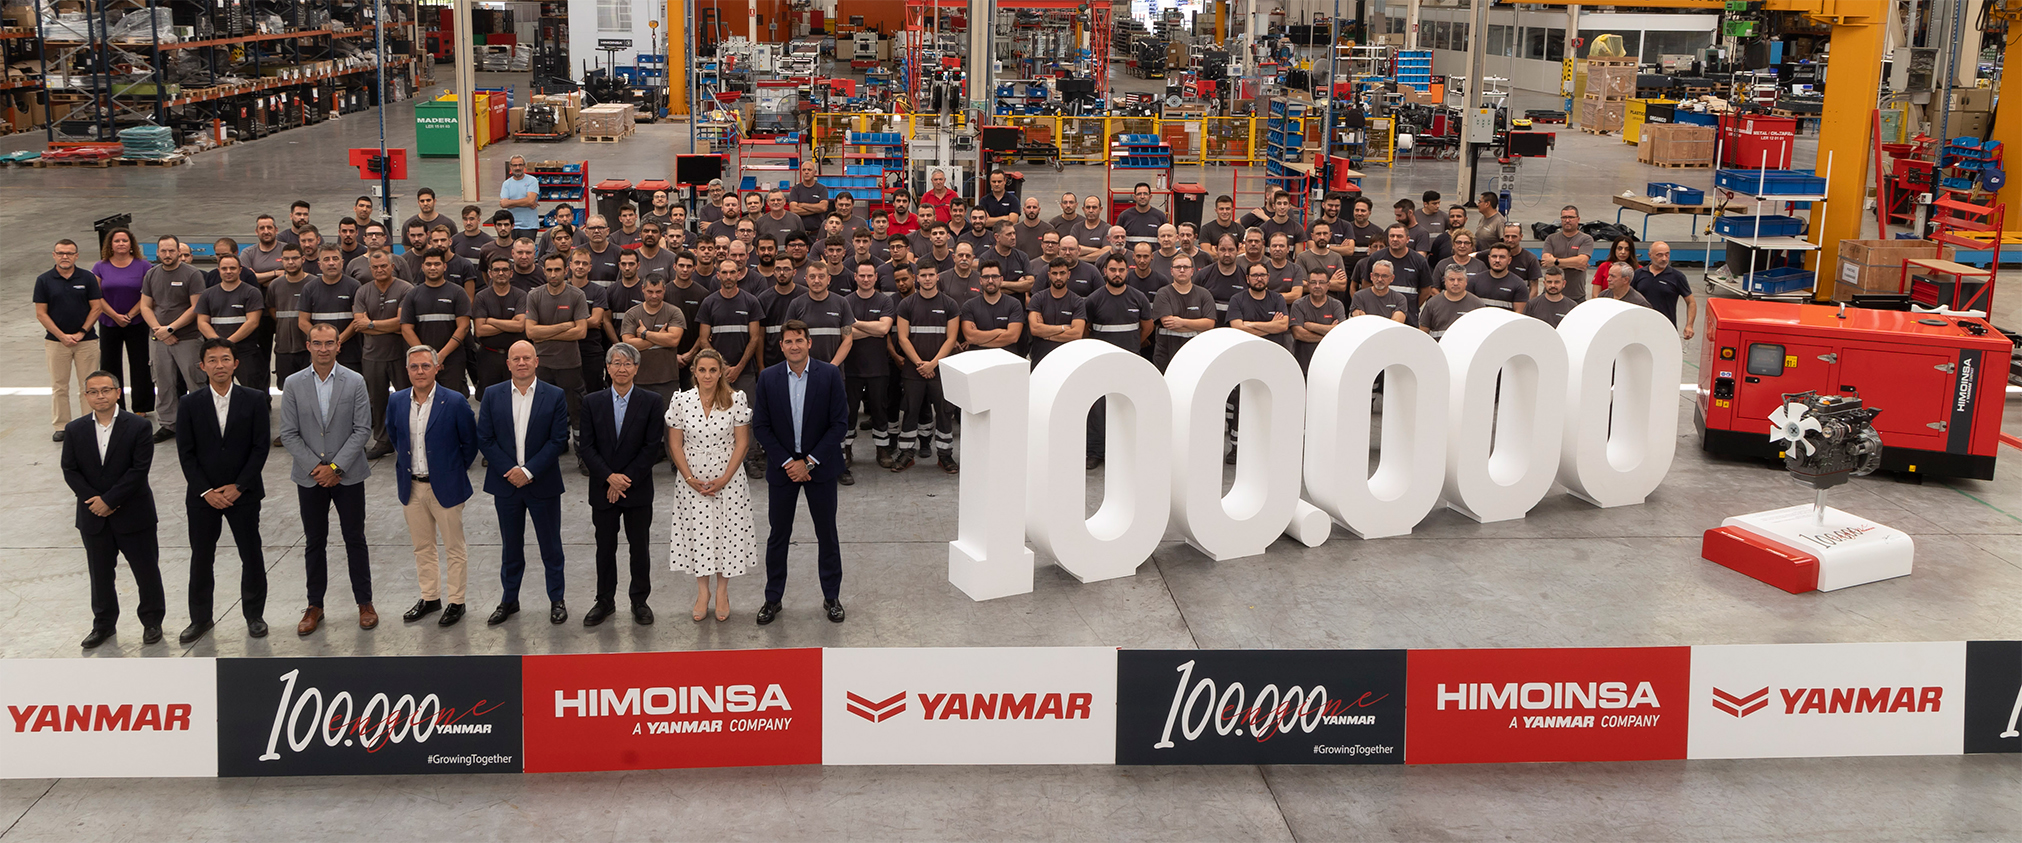 HIMOINSA achieves a new milestone! The company has now produced 100,000 generator sets with Yanmar engines.